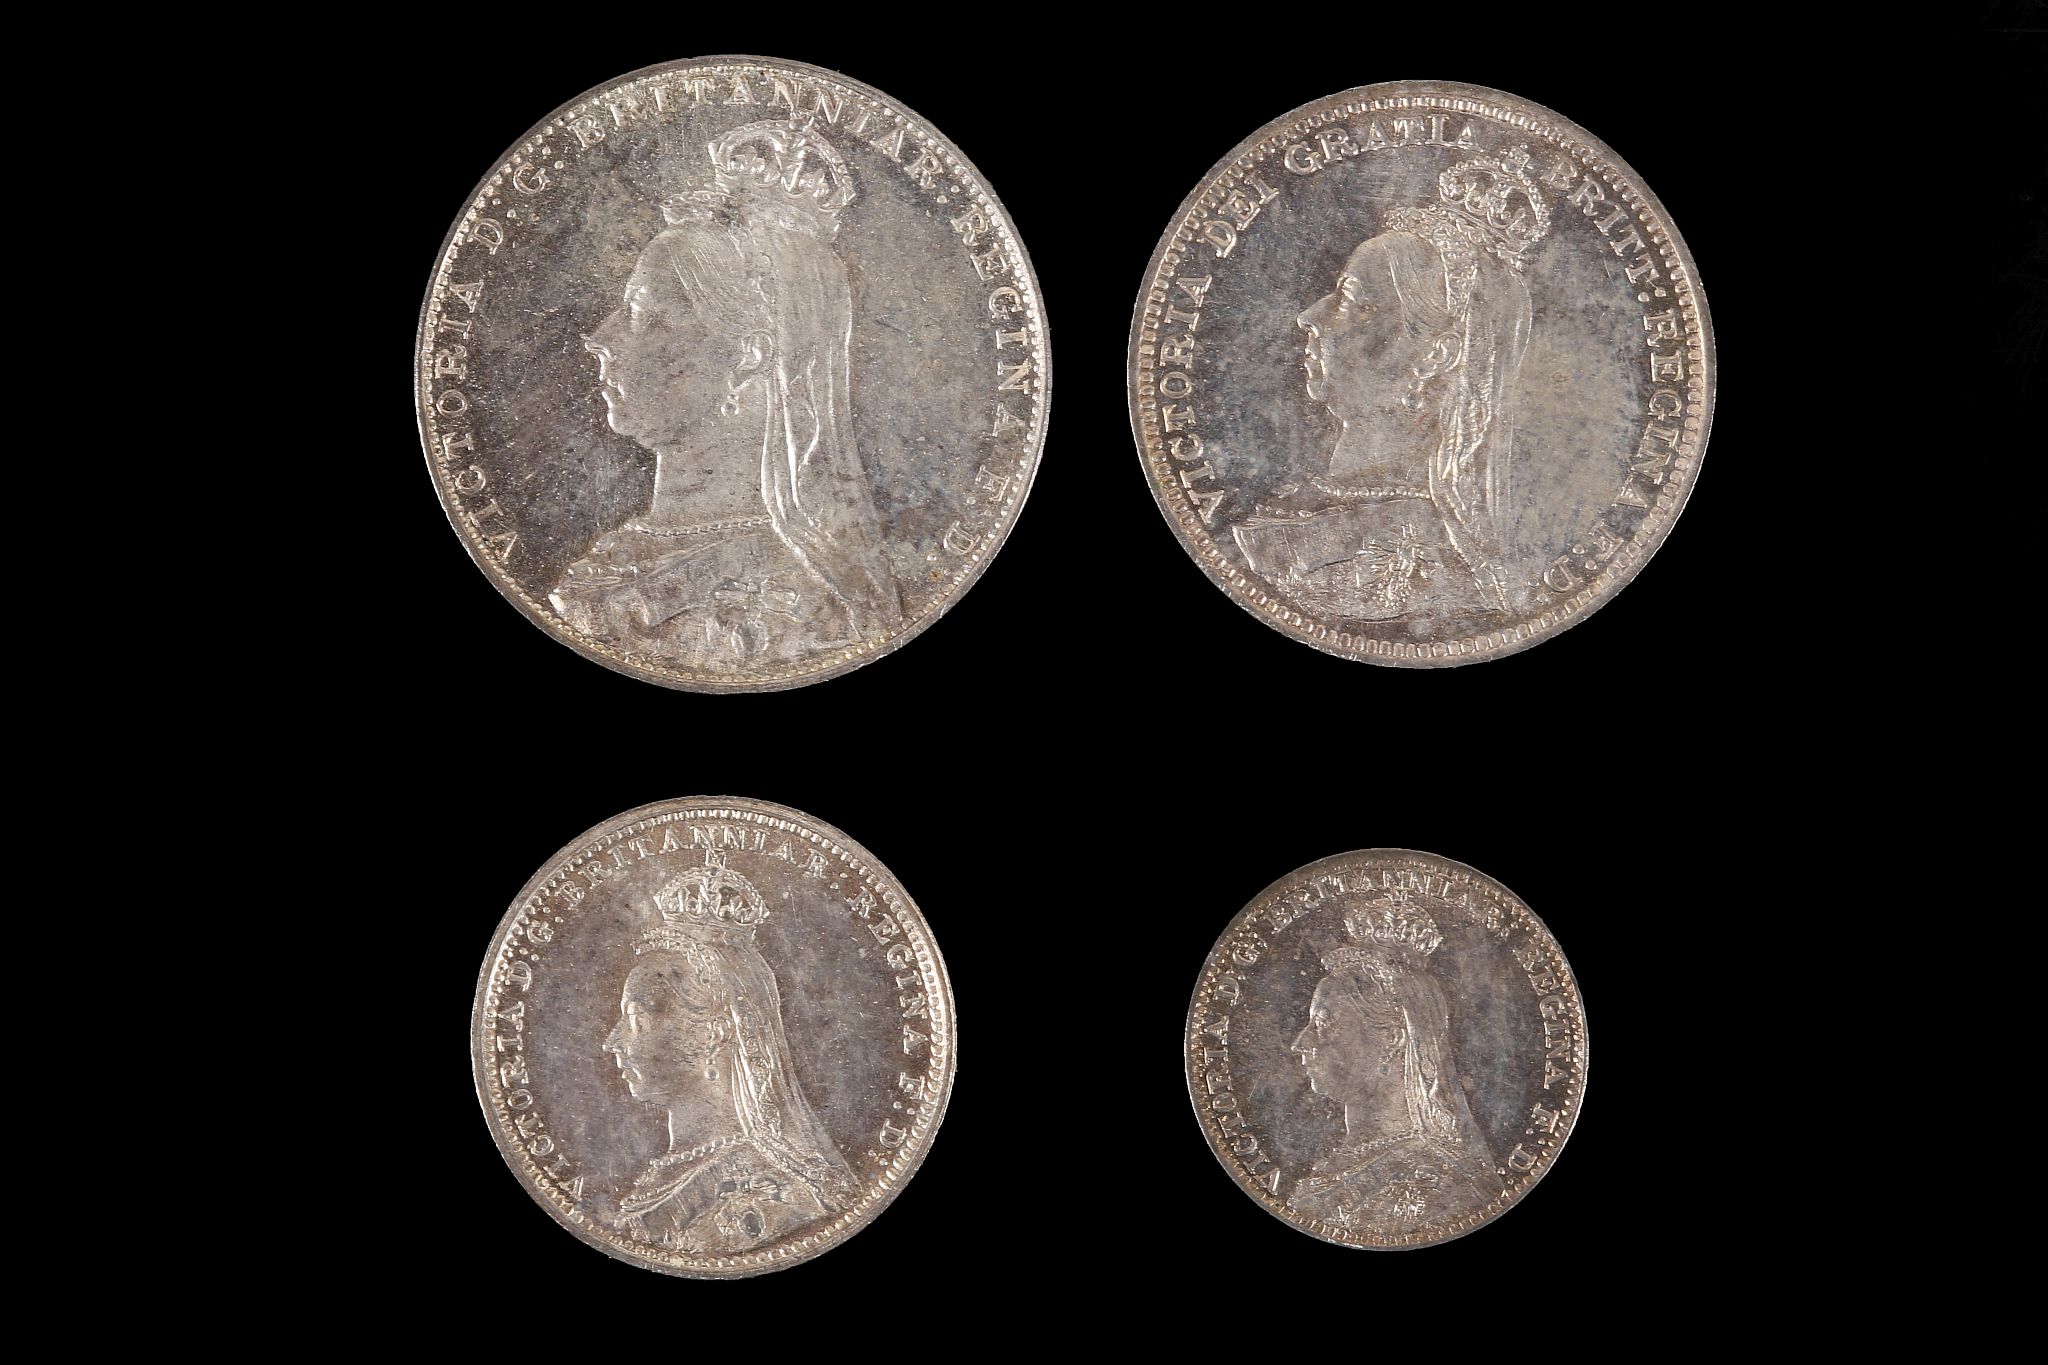 Victoria 1892, maundy set of four coins, veiled head left / value in Arabic numerals beneath crown - Image 2 of 2